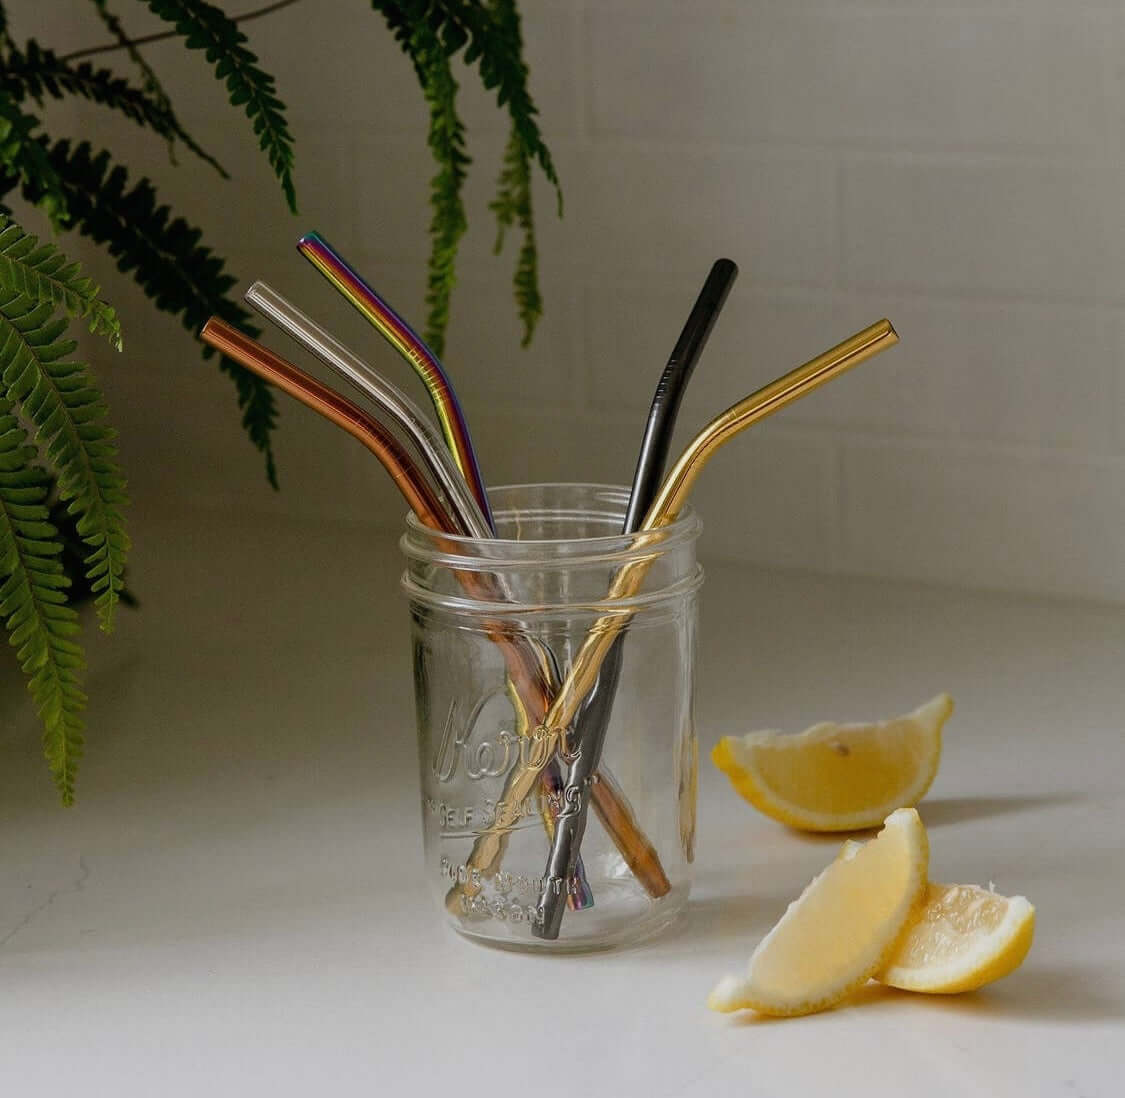 An empty clear glass with several different color stainless steel straws in it.